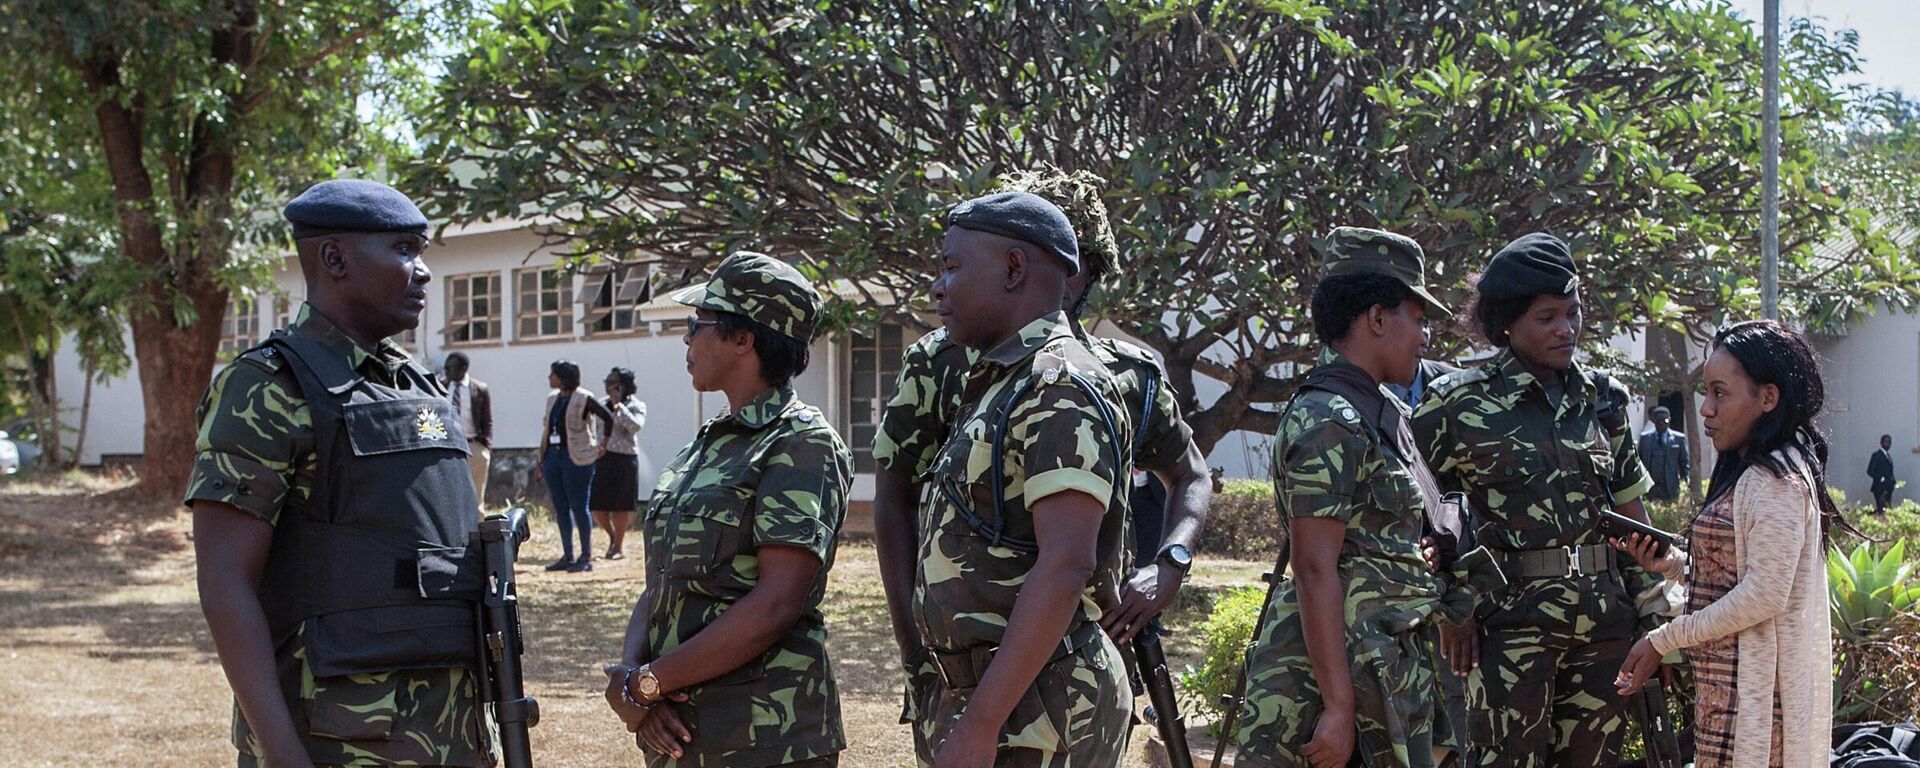 Malawi Police officers stand by as they manage Malawi opposition party supporters and members outside Lilongwe High Court in Lilongwe, Malawi, on June 26, 2019, while an election related case is taking place inside. - Sputnik International, 1920, 20.10.2022